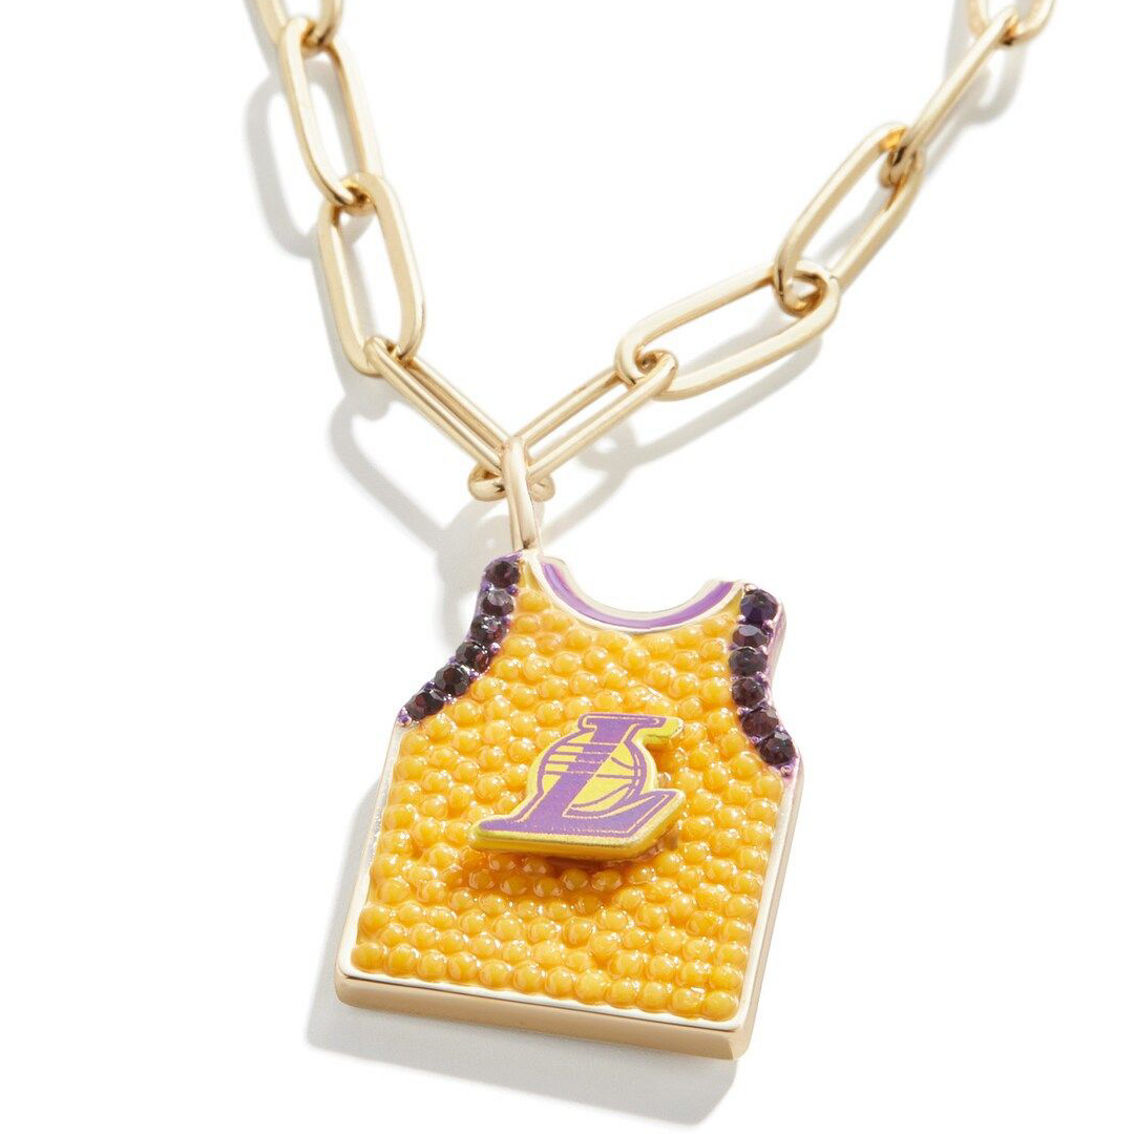 BaubleBar Los Angeles Lakers Team Jersey Necklace - Image 3 of 4